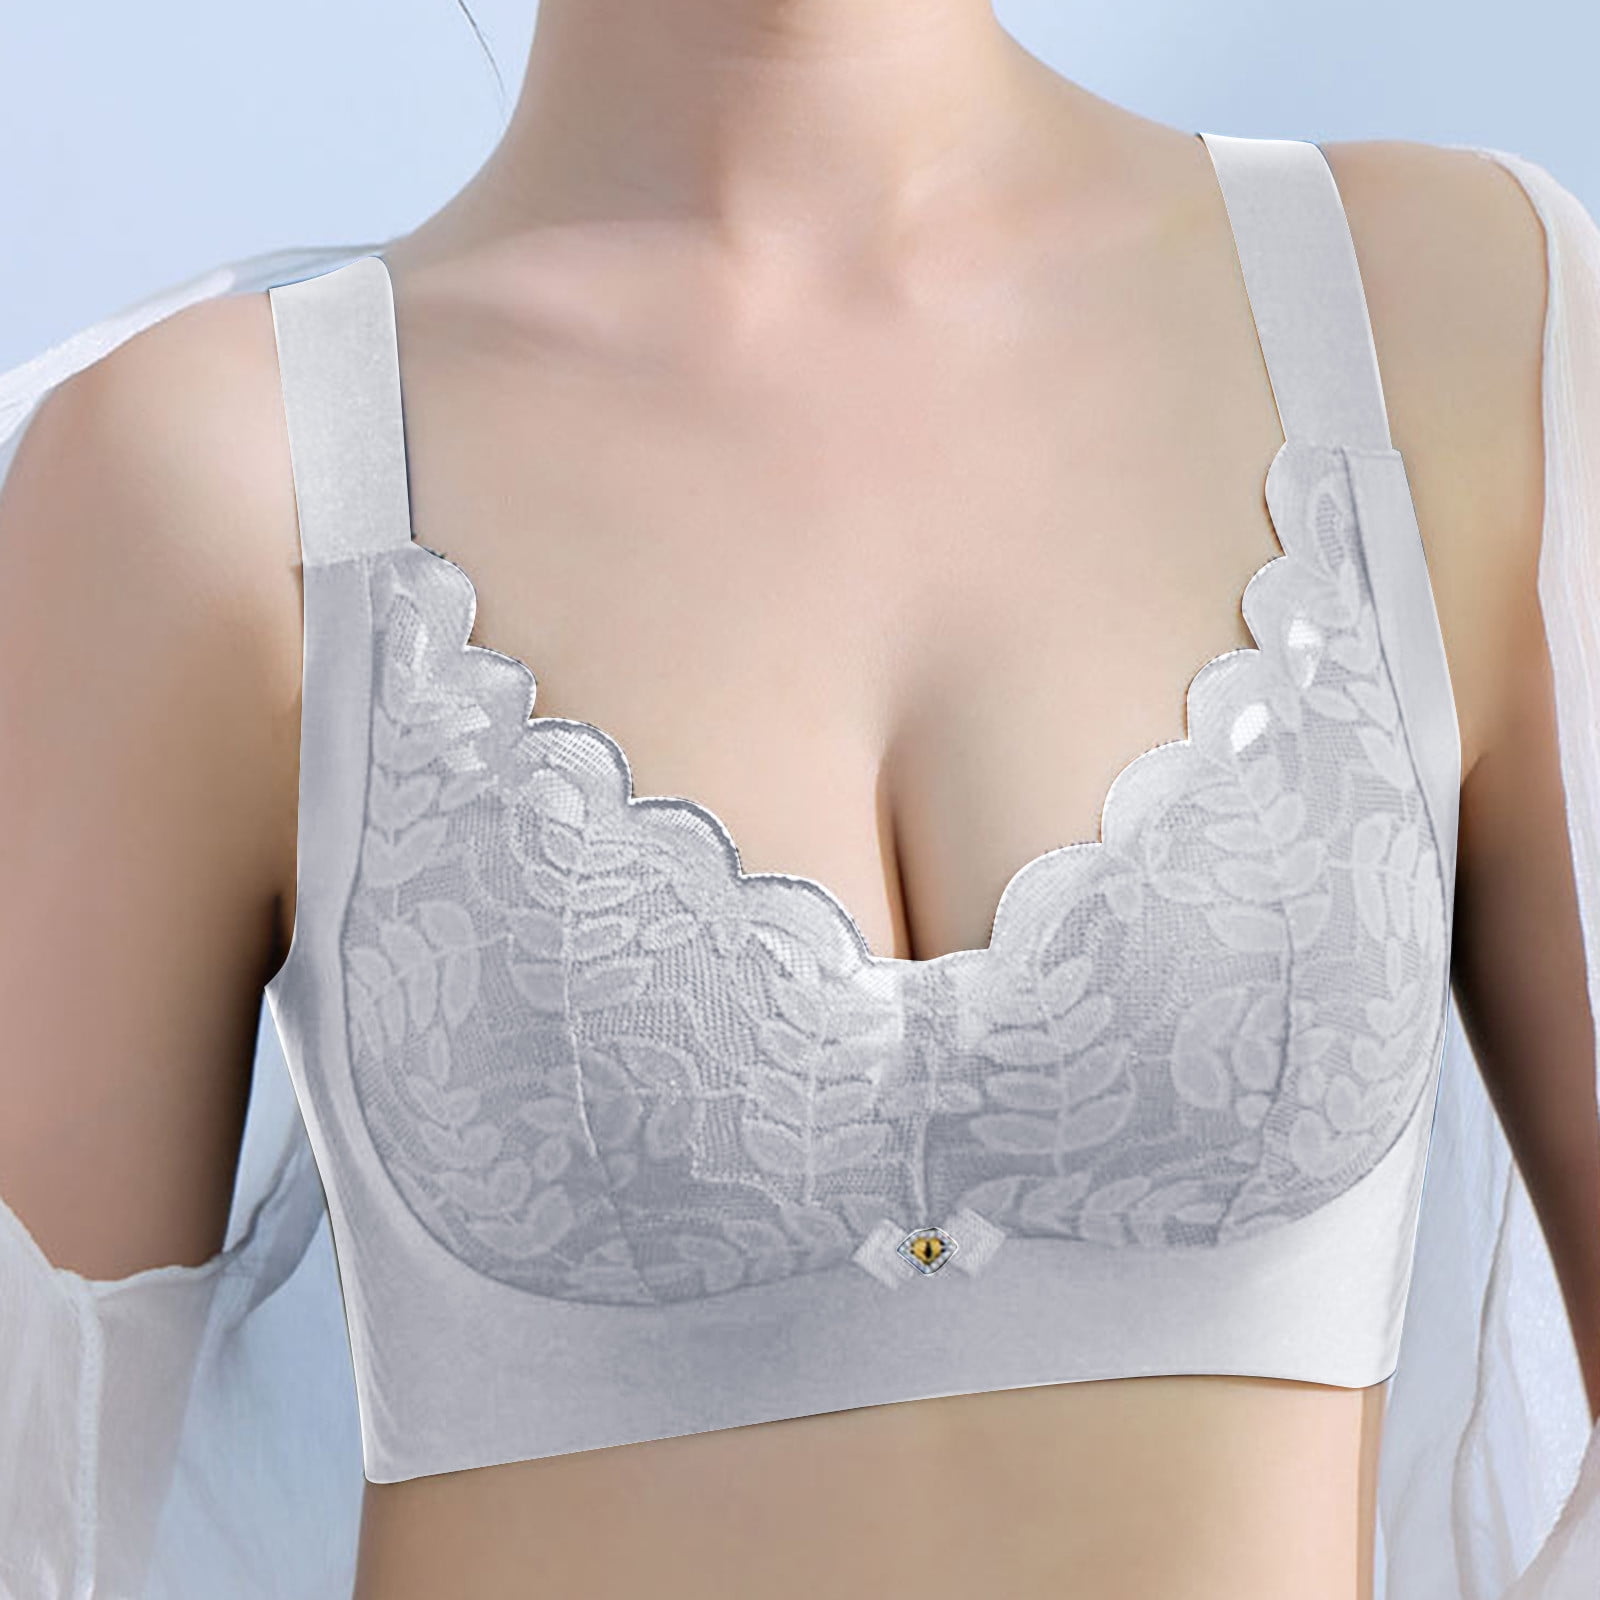 New Floral Push Up Bras For Women Seamless Female Plus Size Lingerie Def  Cup Full Underwearbras